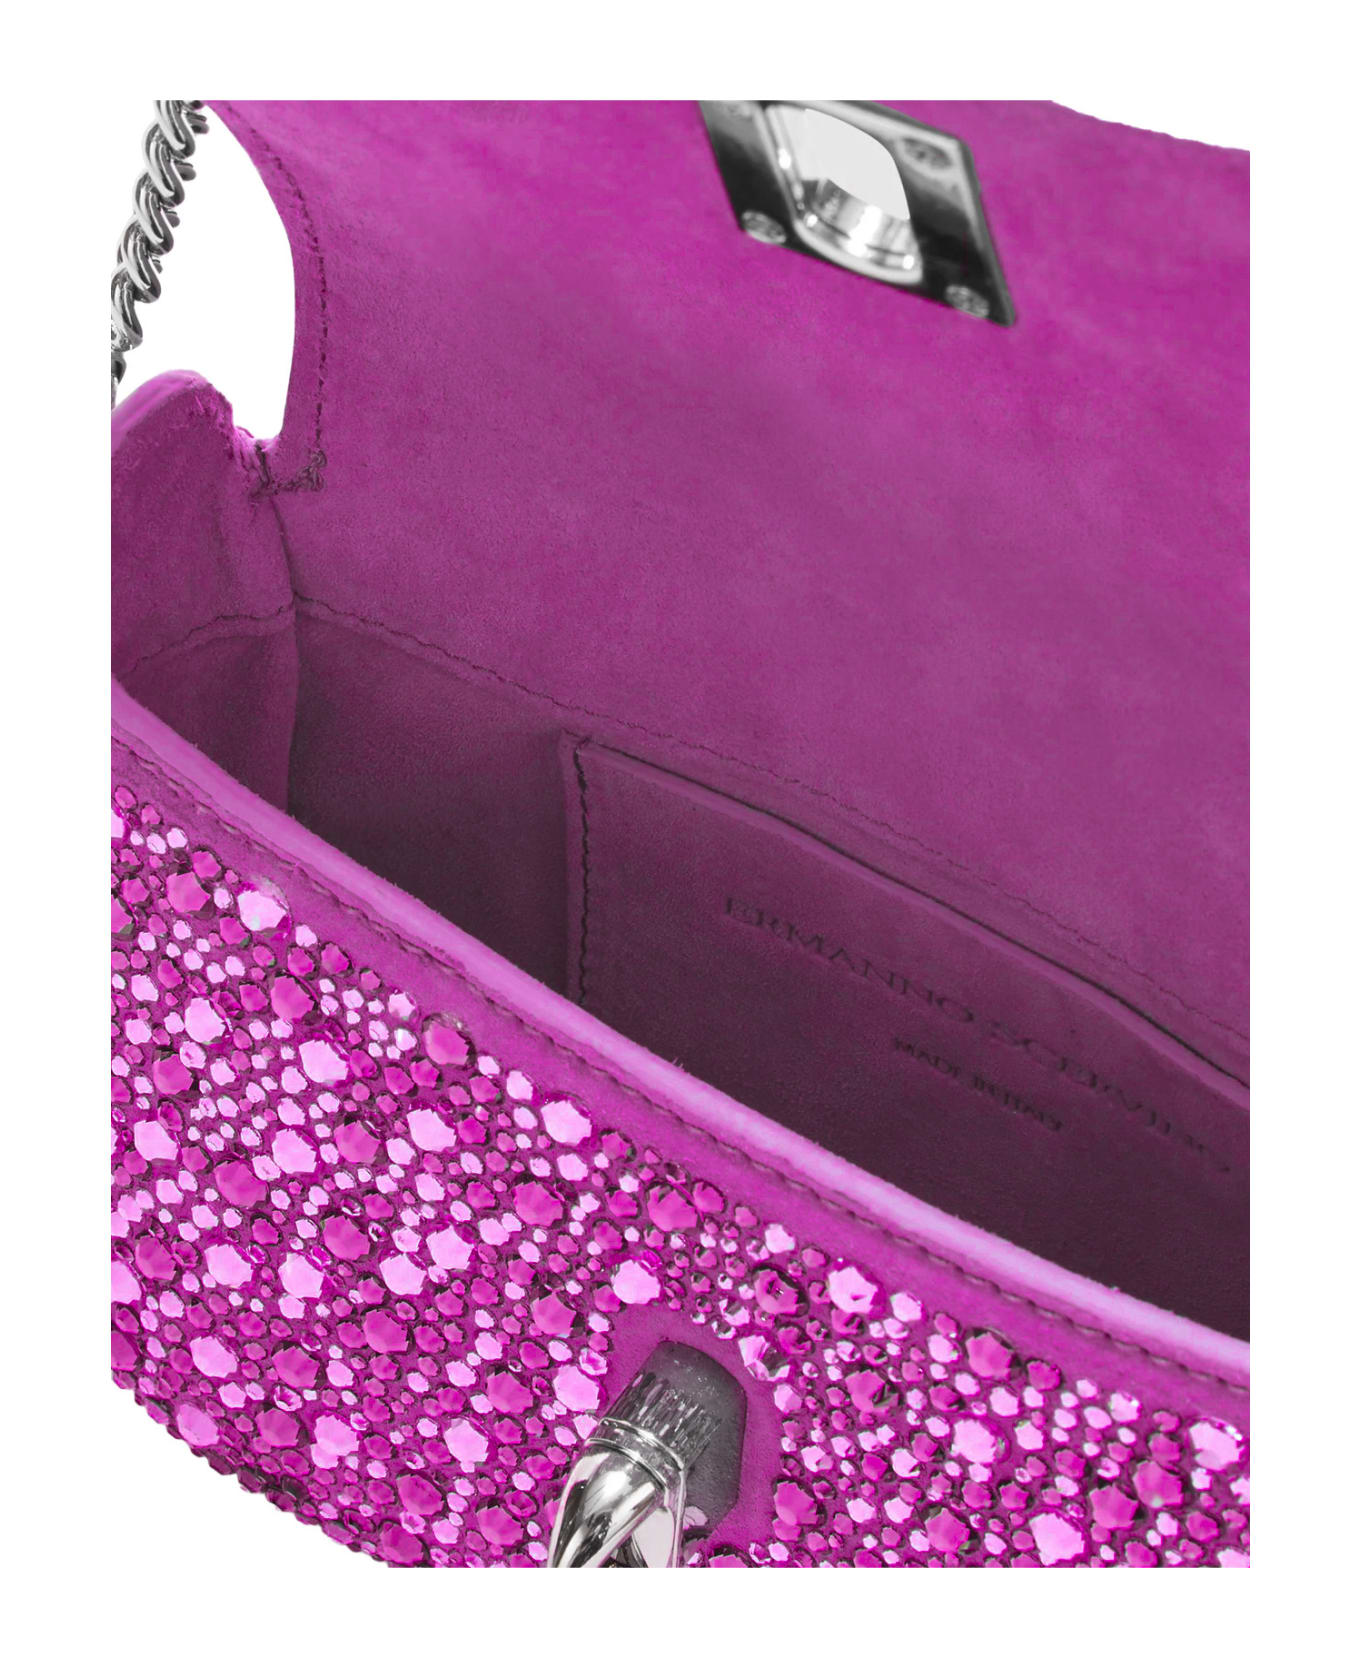 Ermanno Scervino Fuchsia Audrey Bag With Crystals - Pink